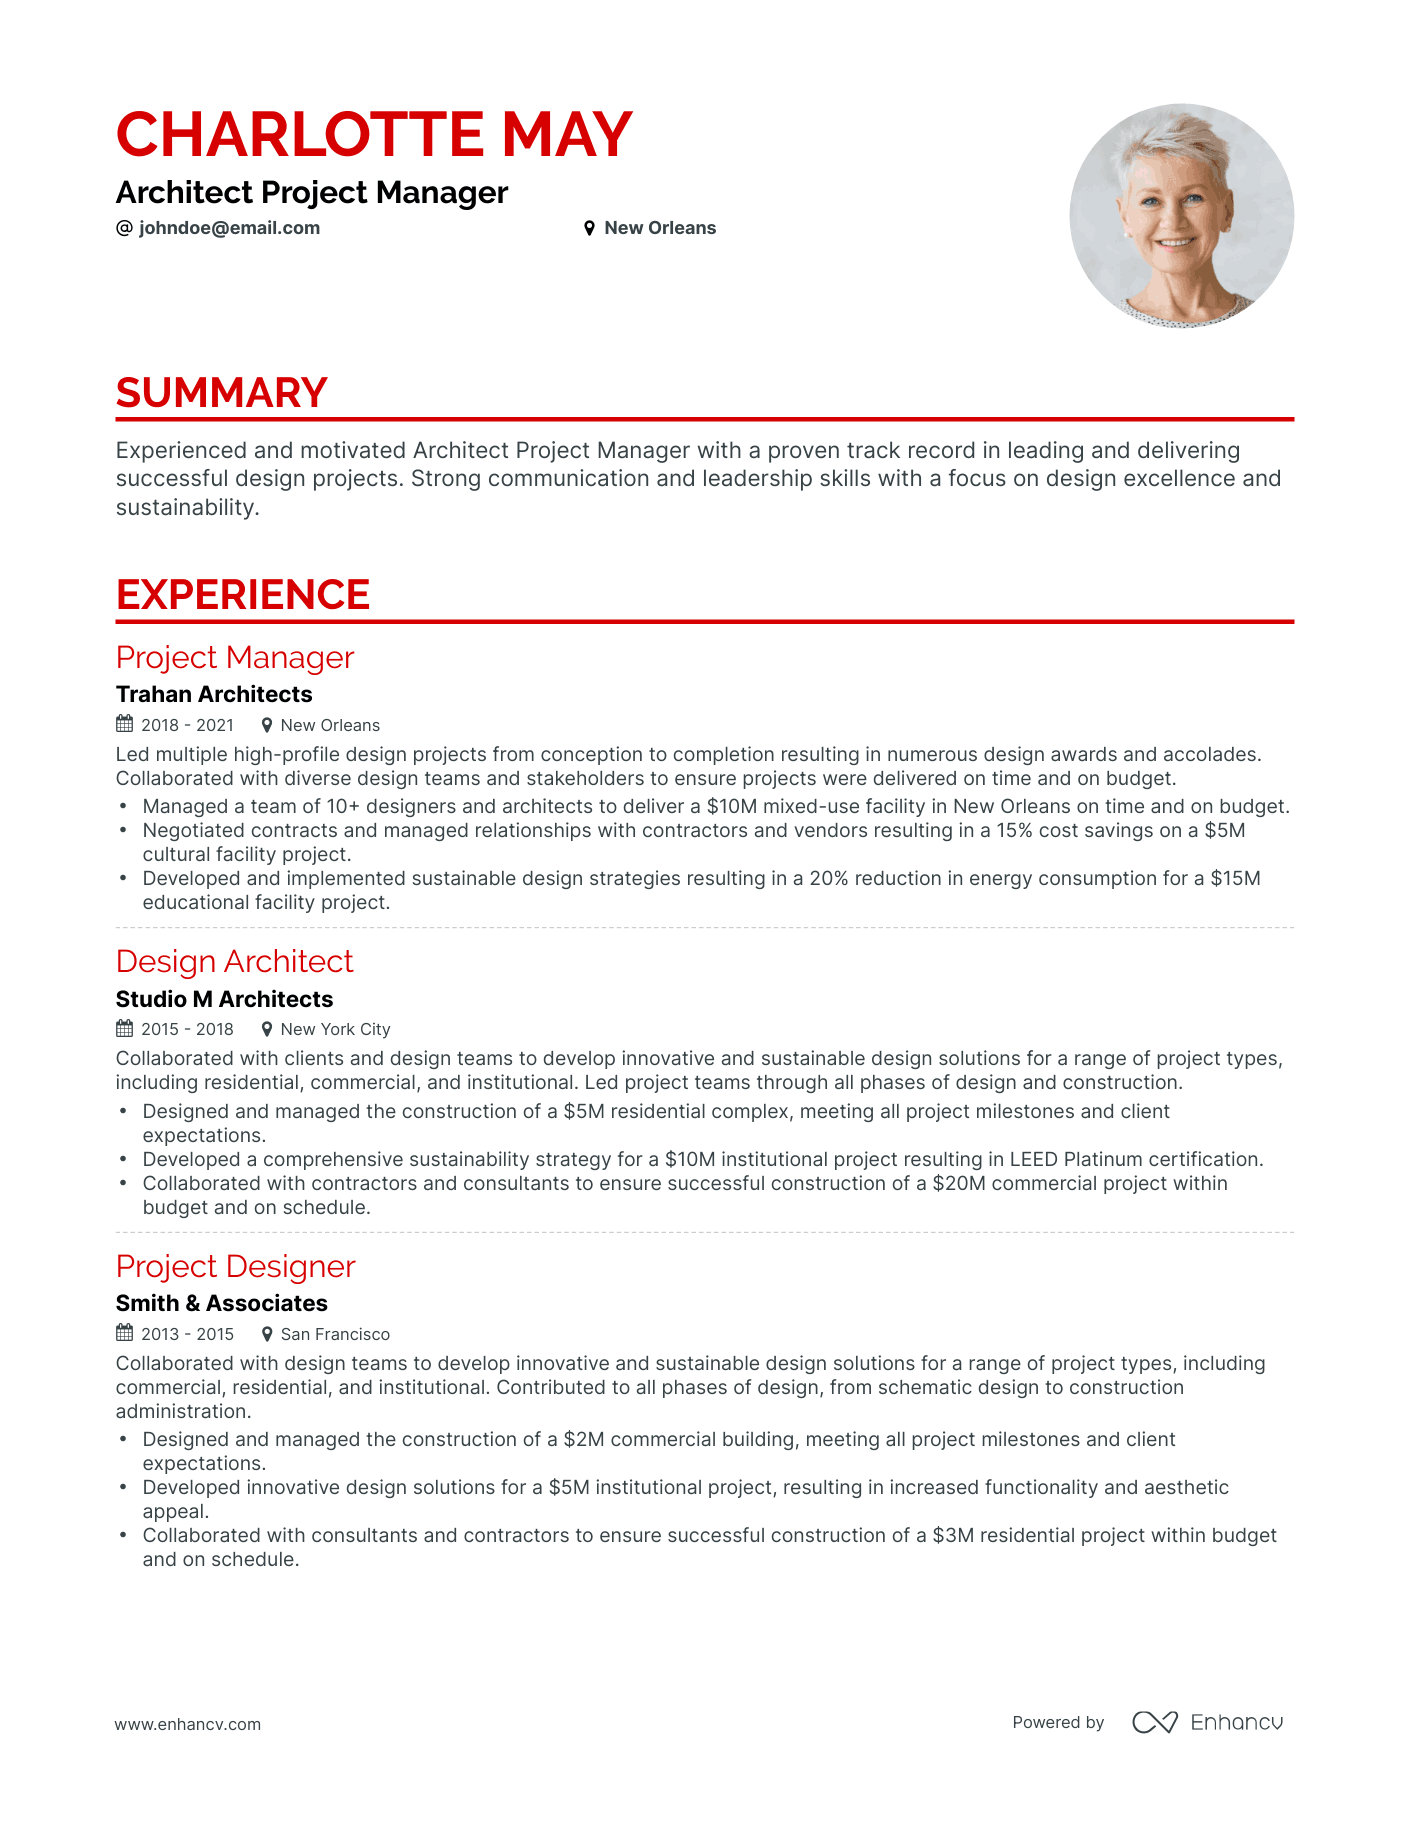 Classic Architect Project Manager Resume Template